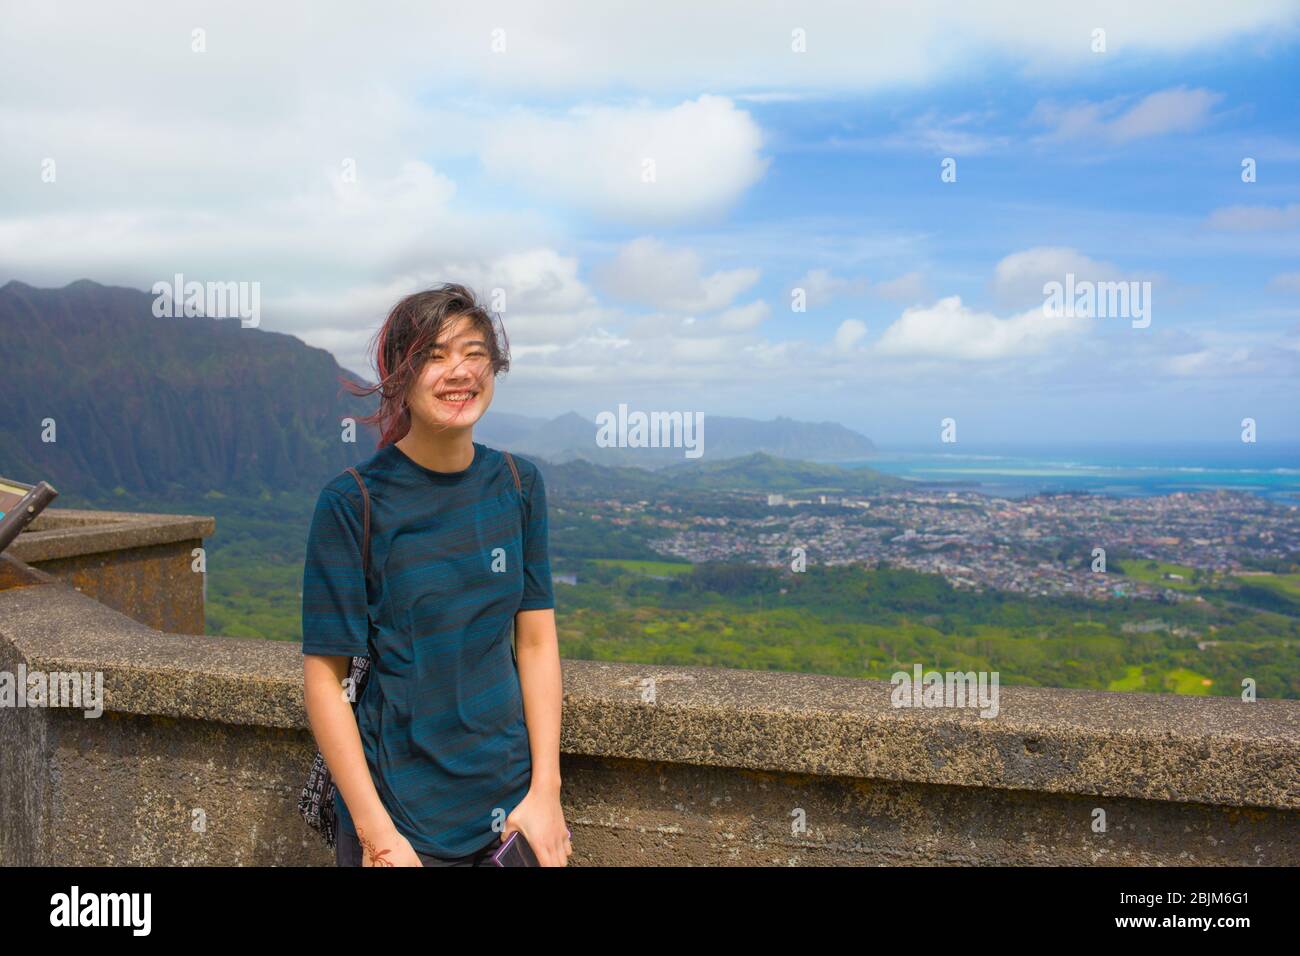 Biracial Asian Caucasian teen girl or young adult standing at Pali Lookout, Oahu, Hawaii on sunny, windy day with views of Kaneohe city and blue ocean Stock Photo